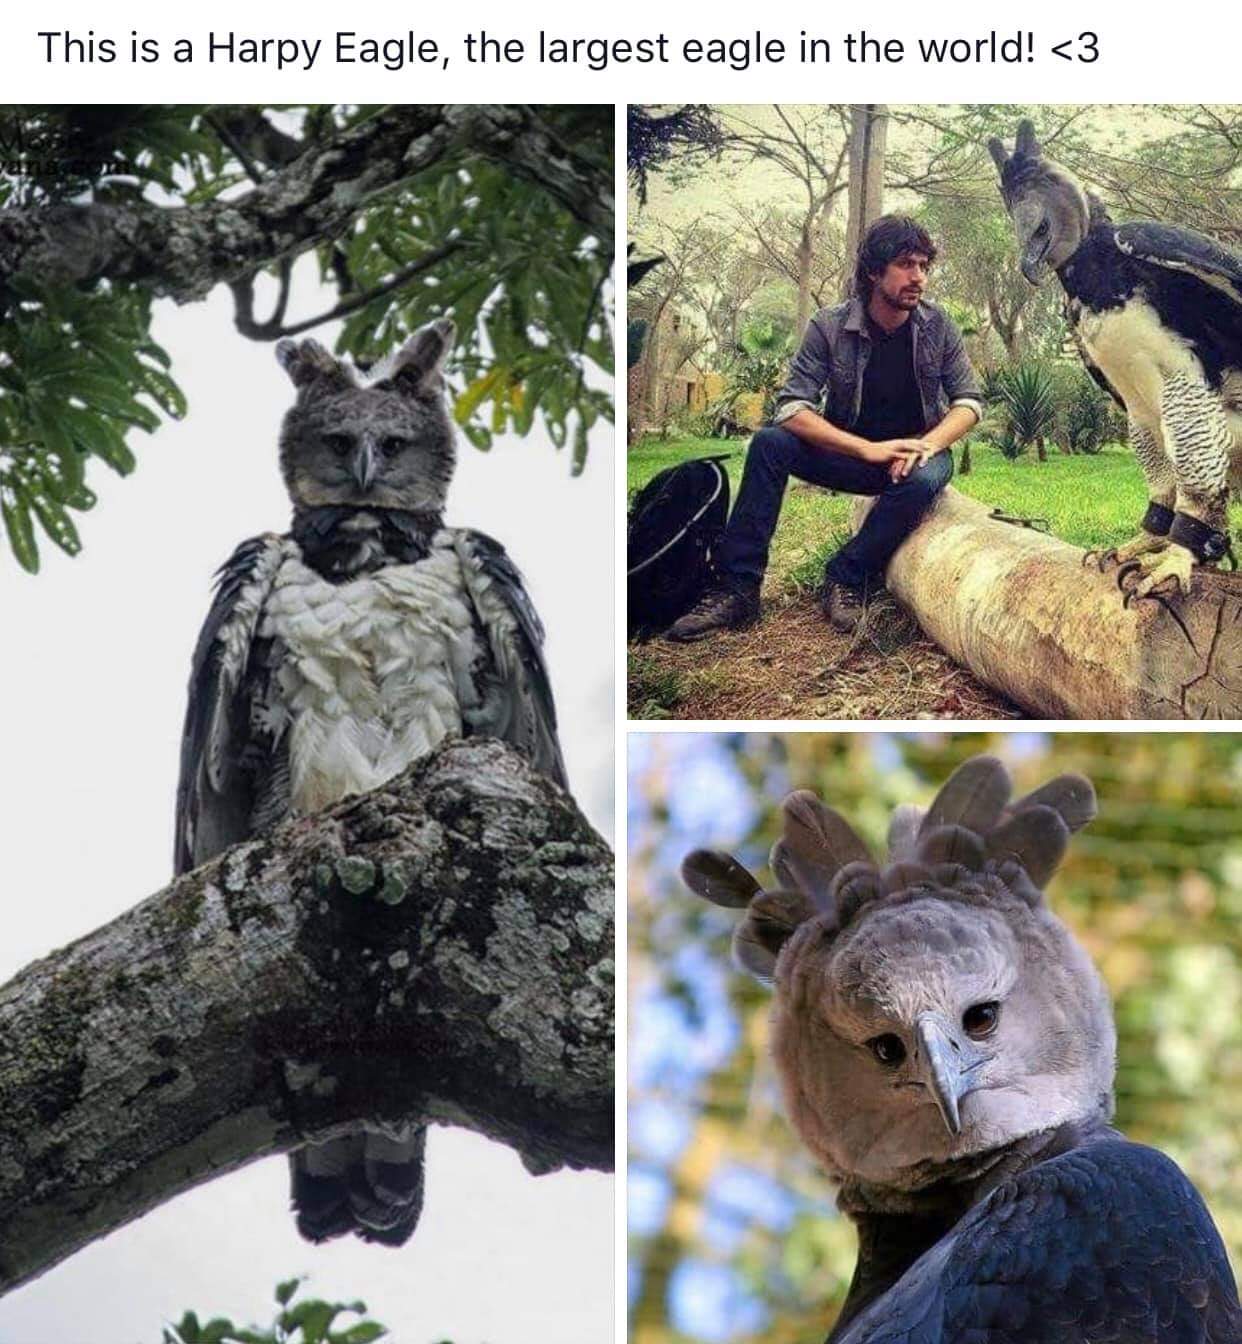 The Harpy Eagle is an absolute unit.